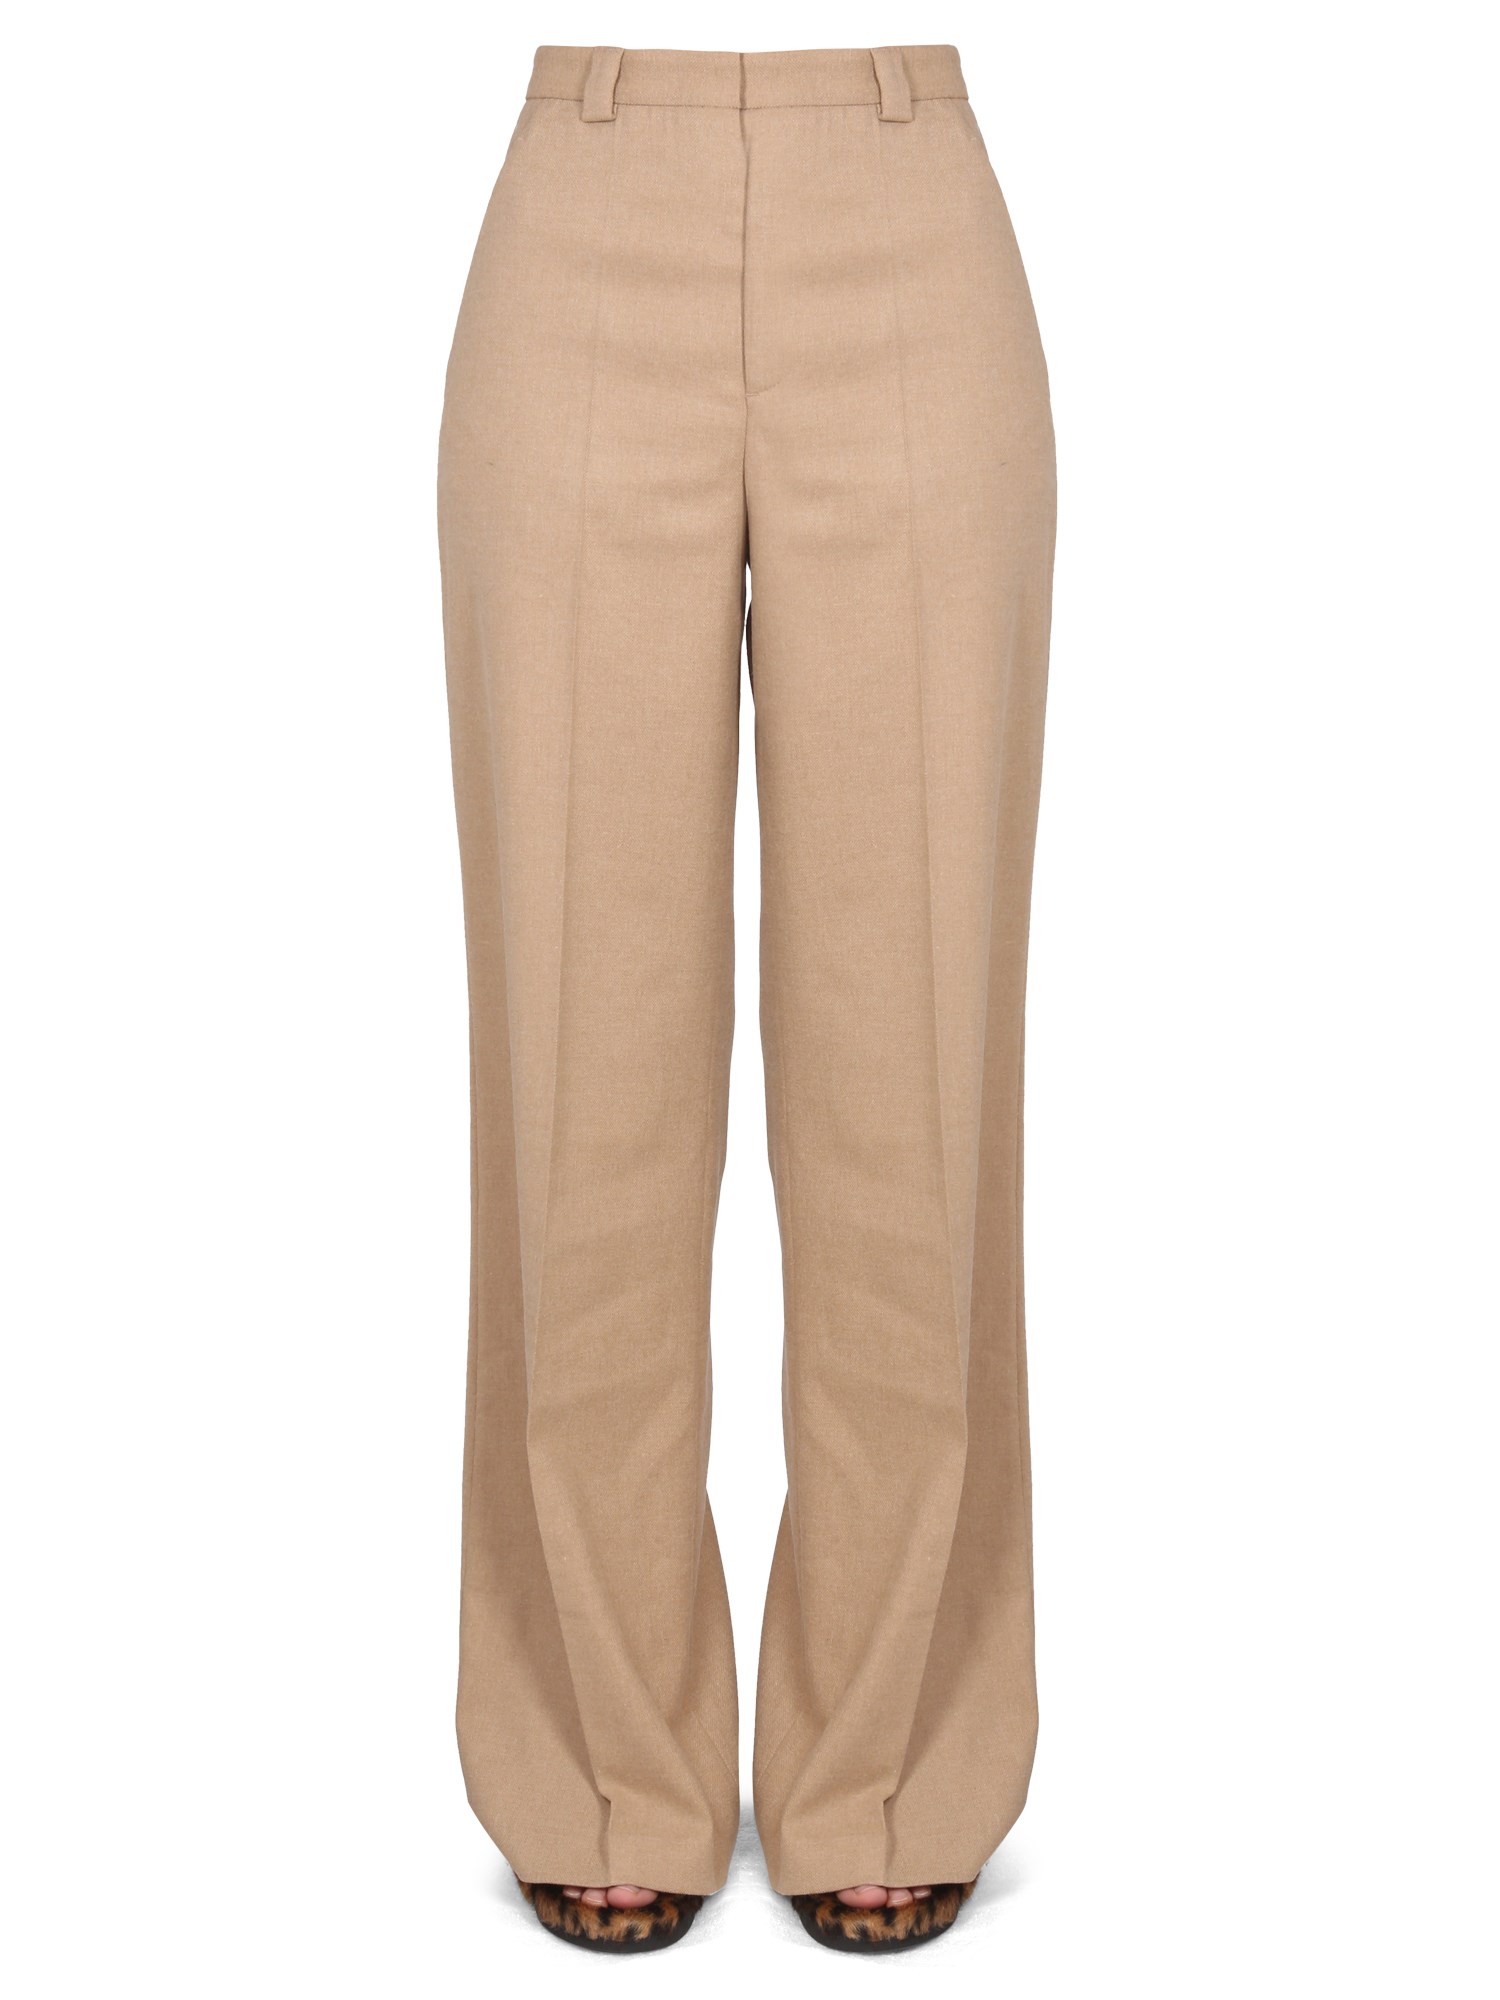 red valentino flared pants